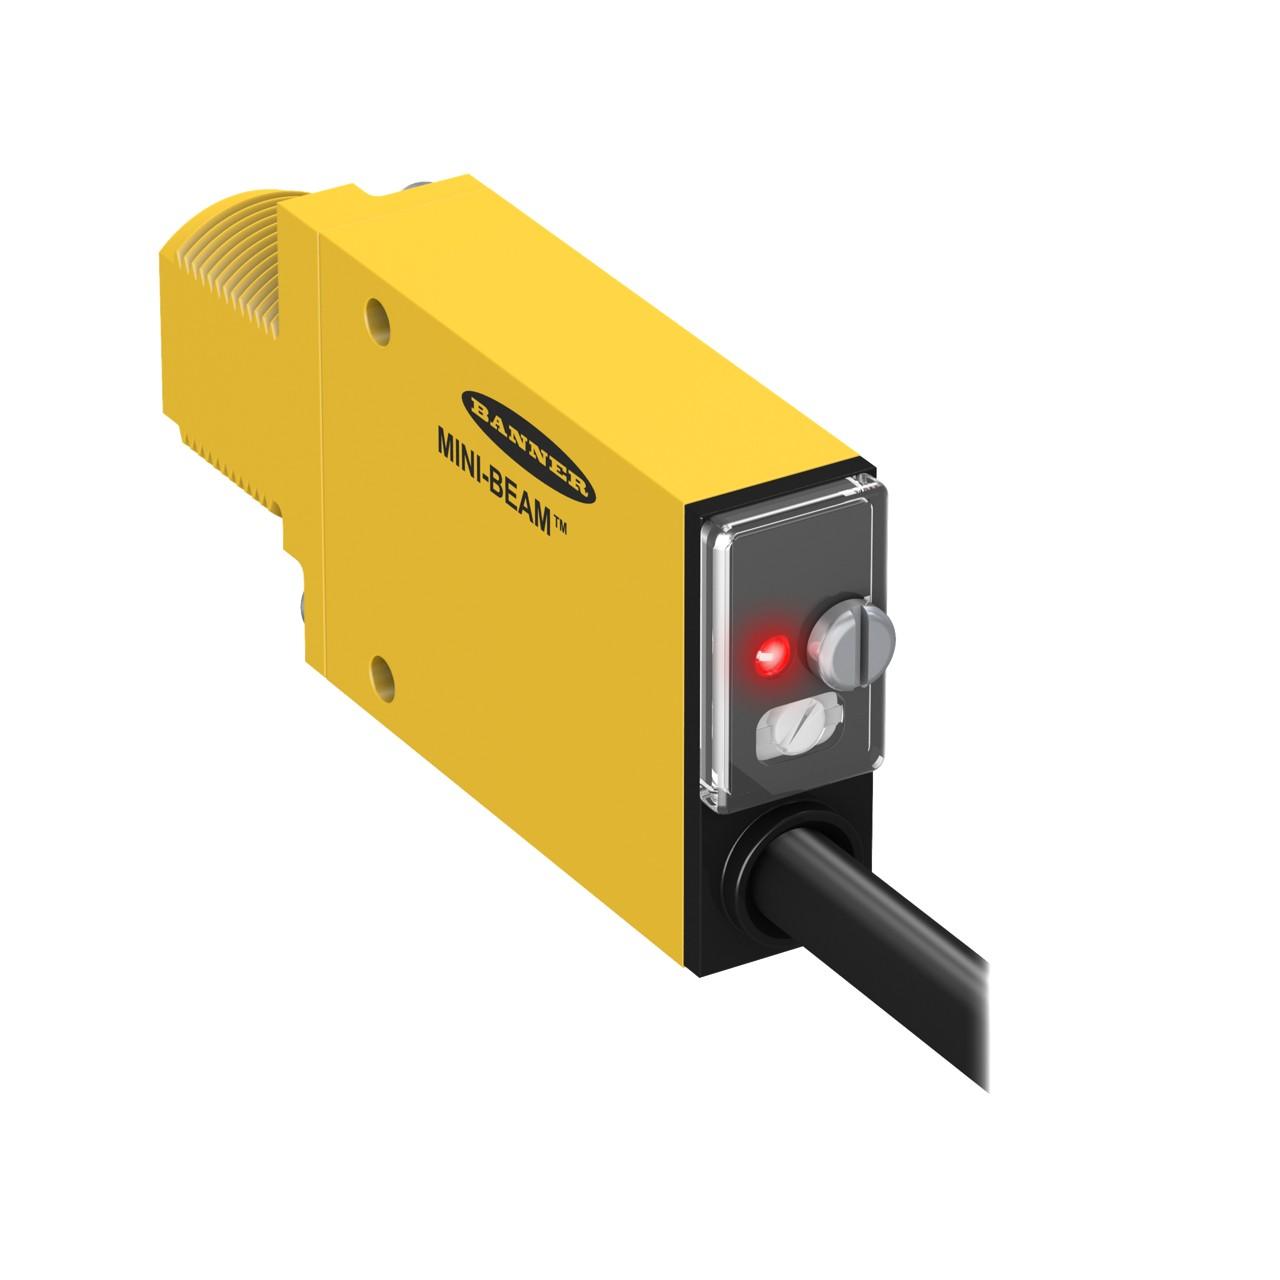 Banner SM2A312D Photo-electric sensor with diffuse mode - Banner Engineering (MINI-BEAM series - SM2A312) - Part #25965 - Sensing range 380mm - Visible red light (650nm) - 1 x digital output (Solid-state AC output; SPST contact type) (Light-ON or Dark-ON operation) - Sup